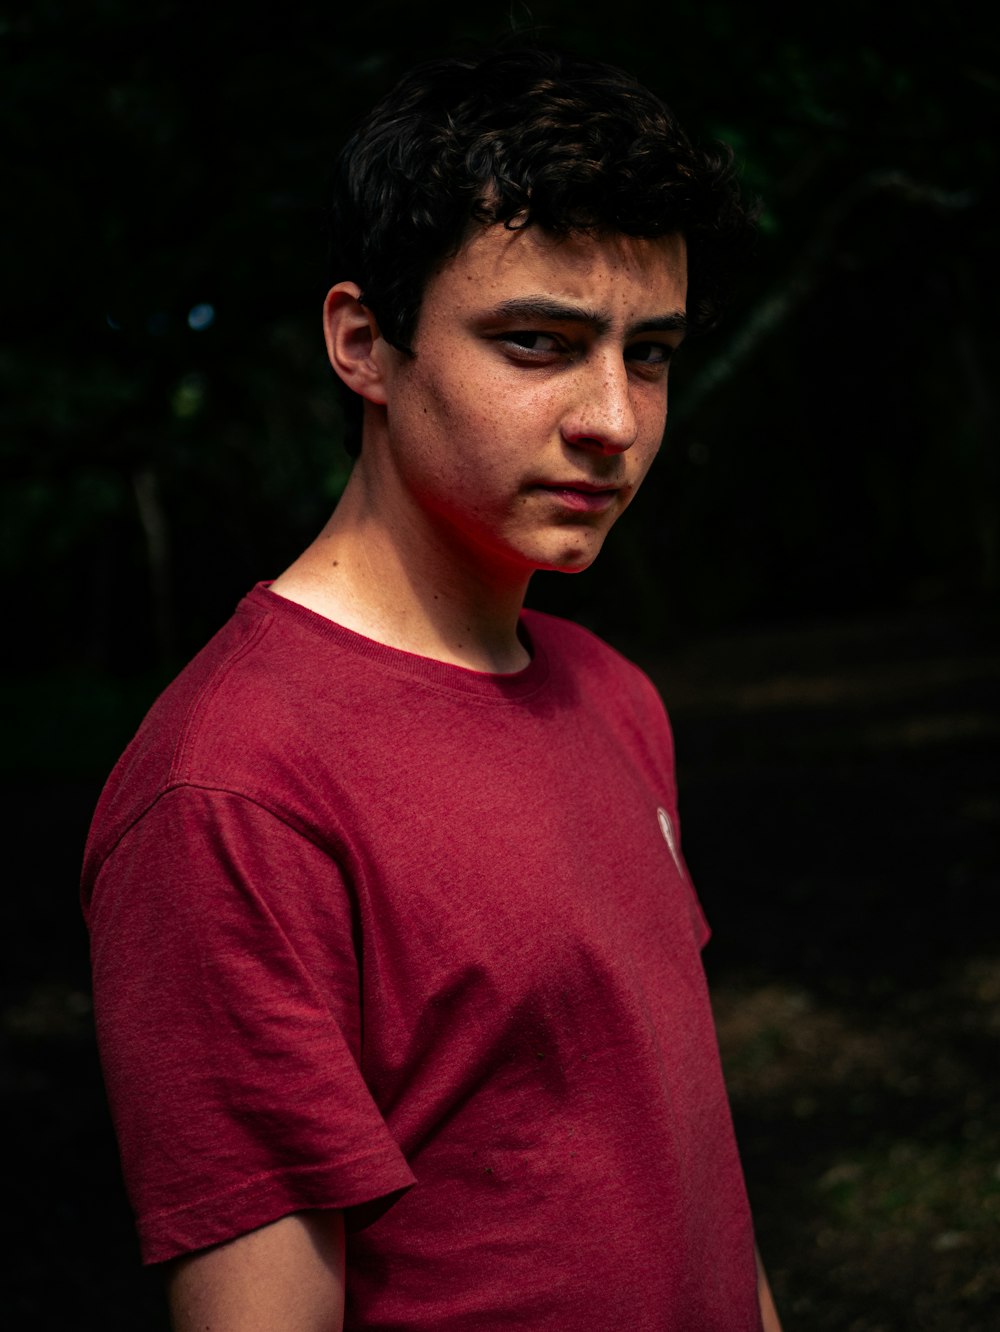 a man in a red shirt standing in the dark